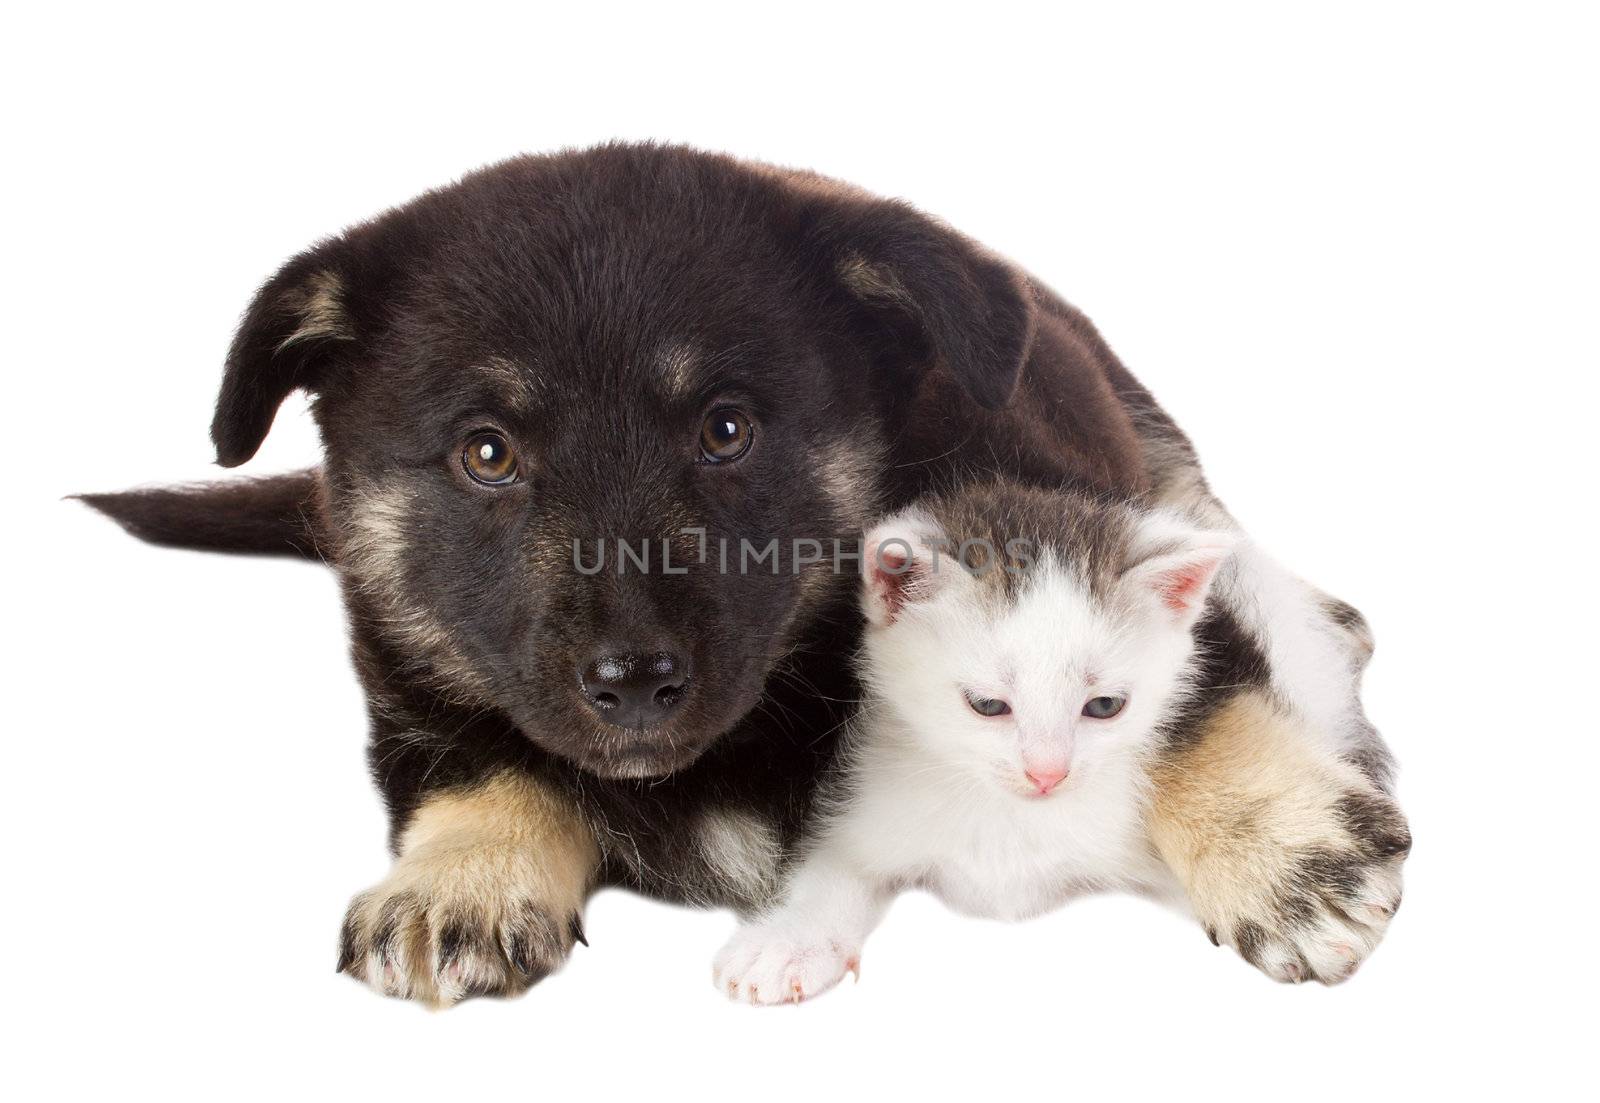 close-up puppy and cat, isolated on white